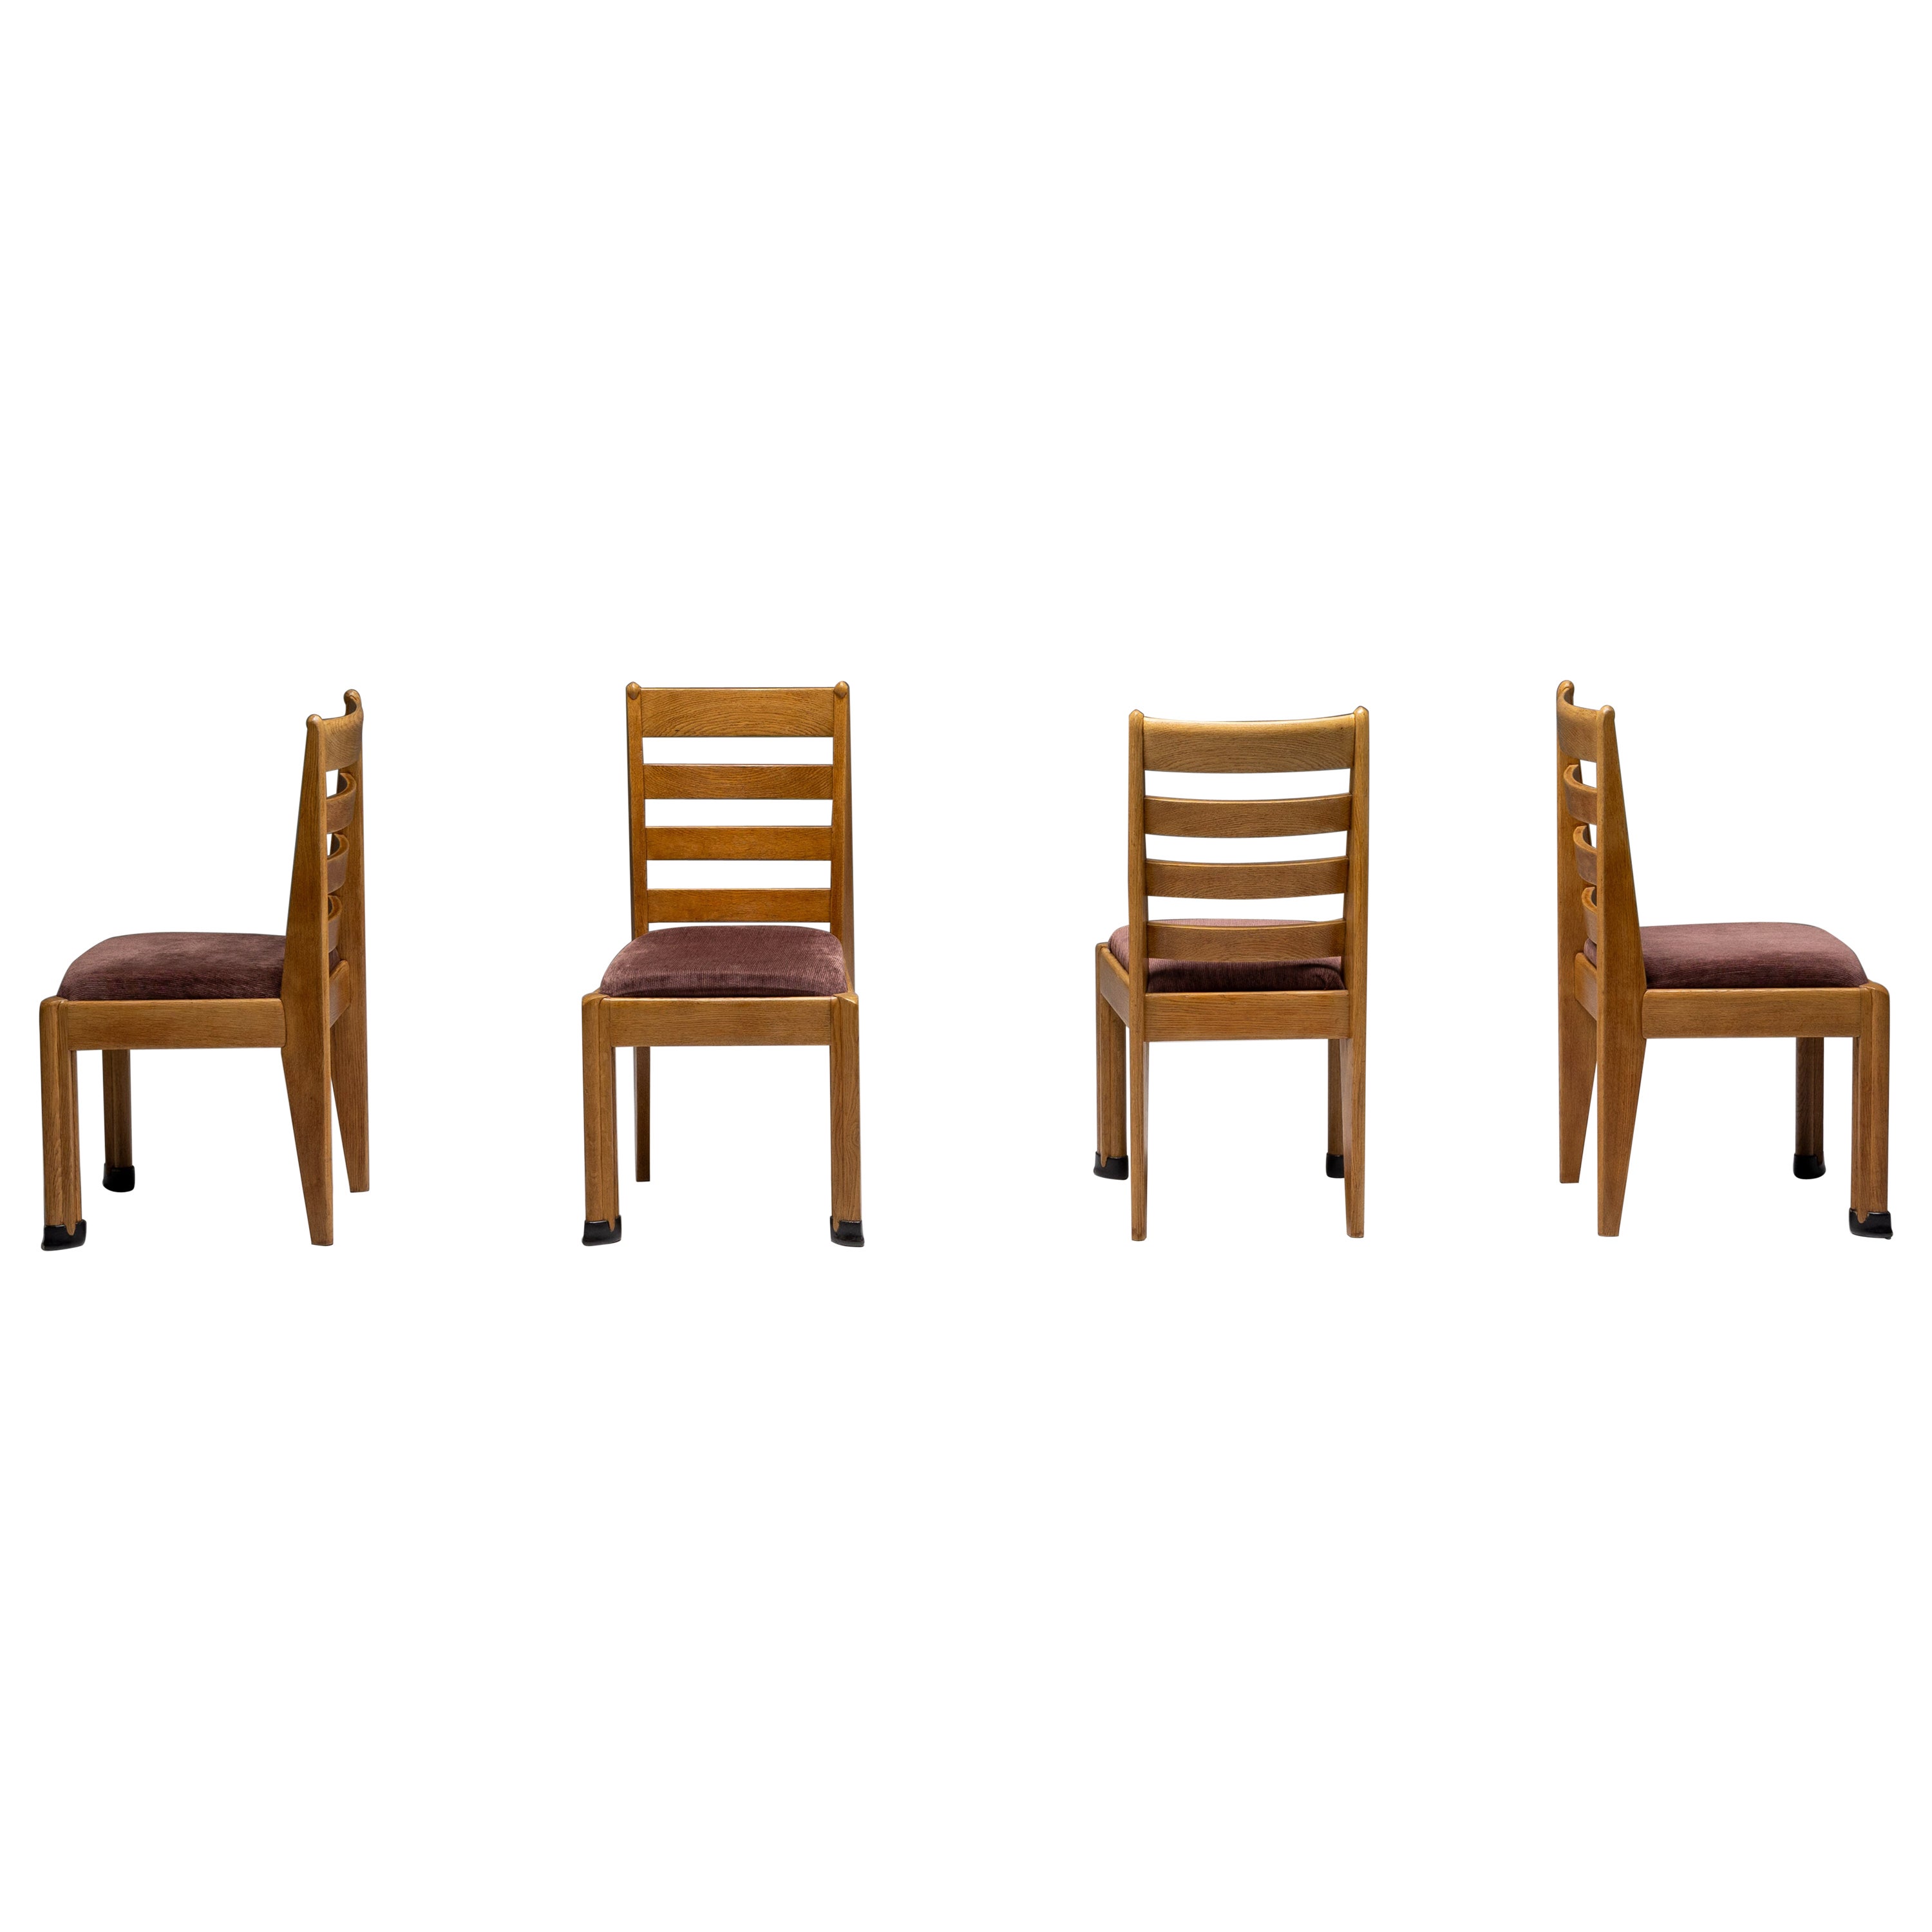 Rationalist Dining Chairs in Oak, Holland, 1920s For Sale